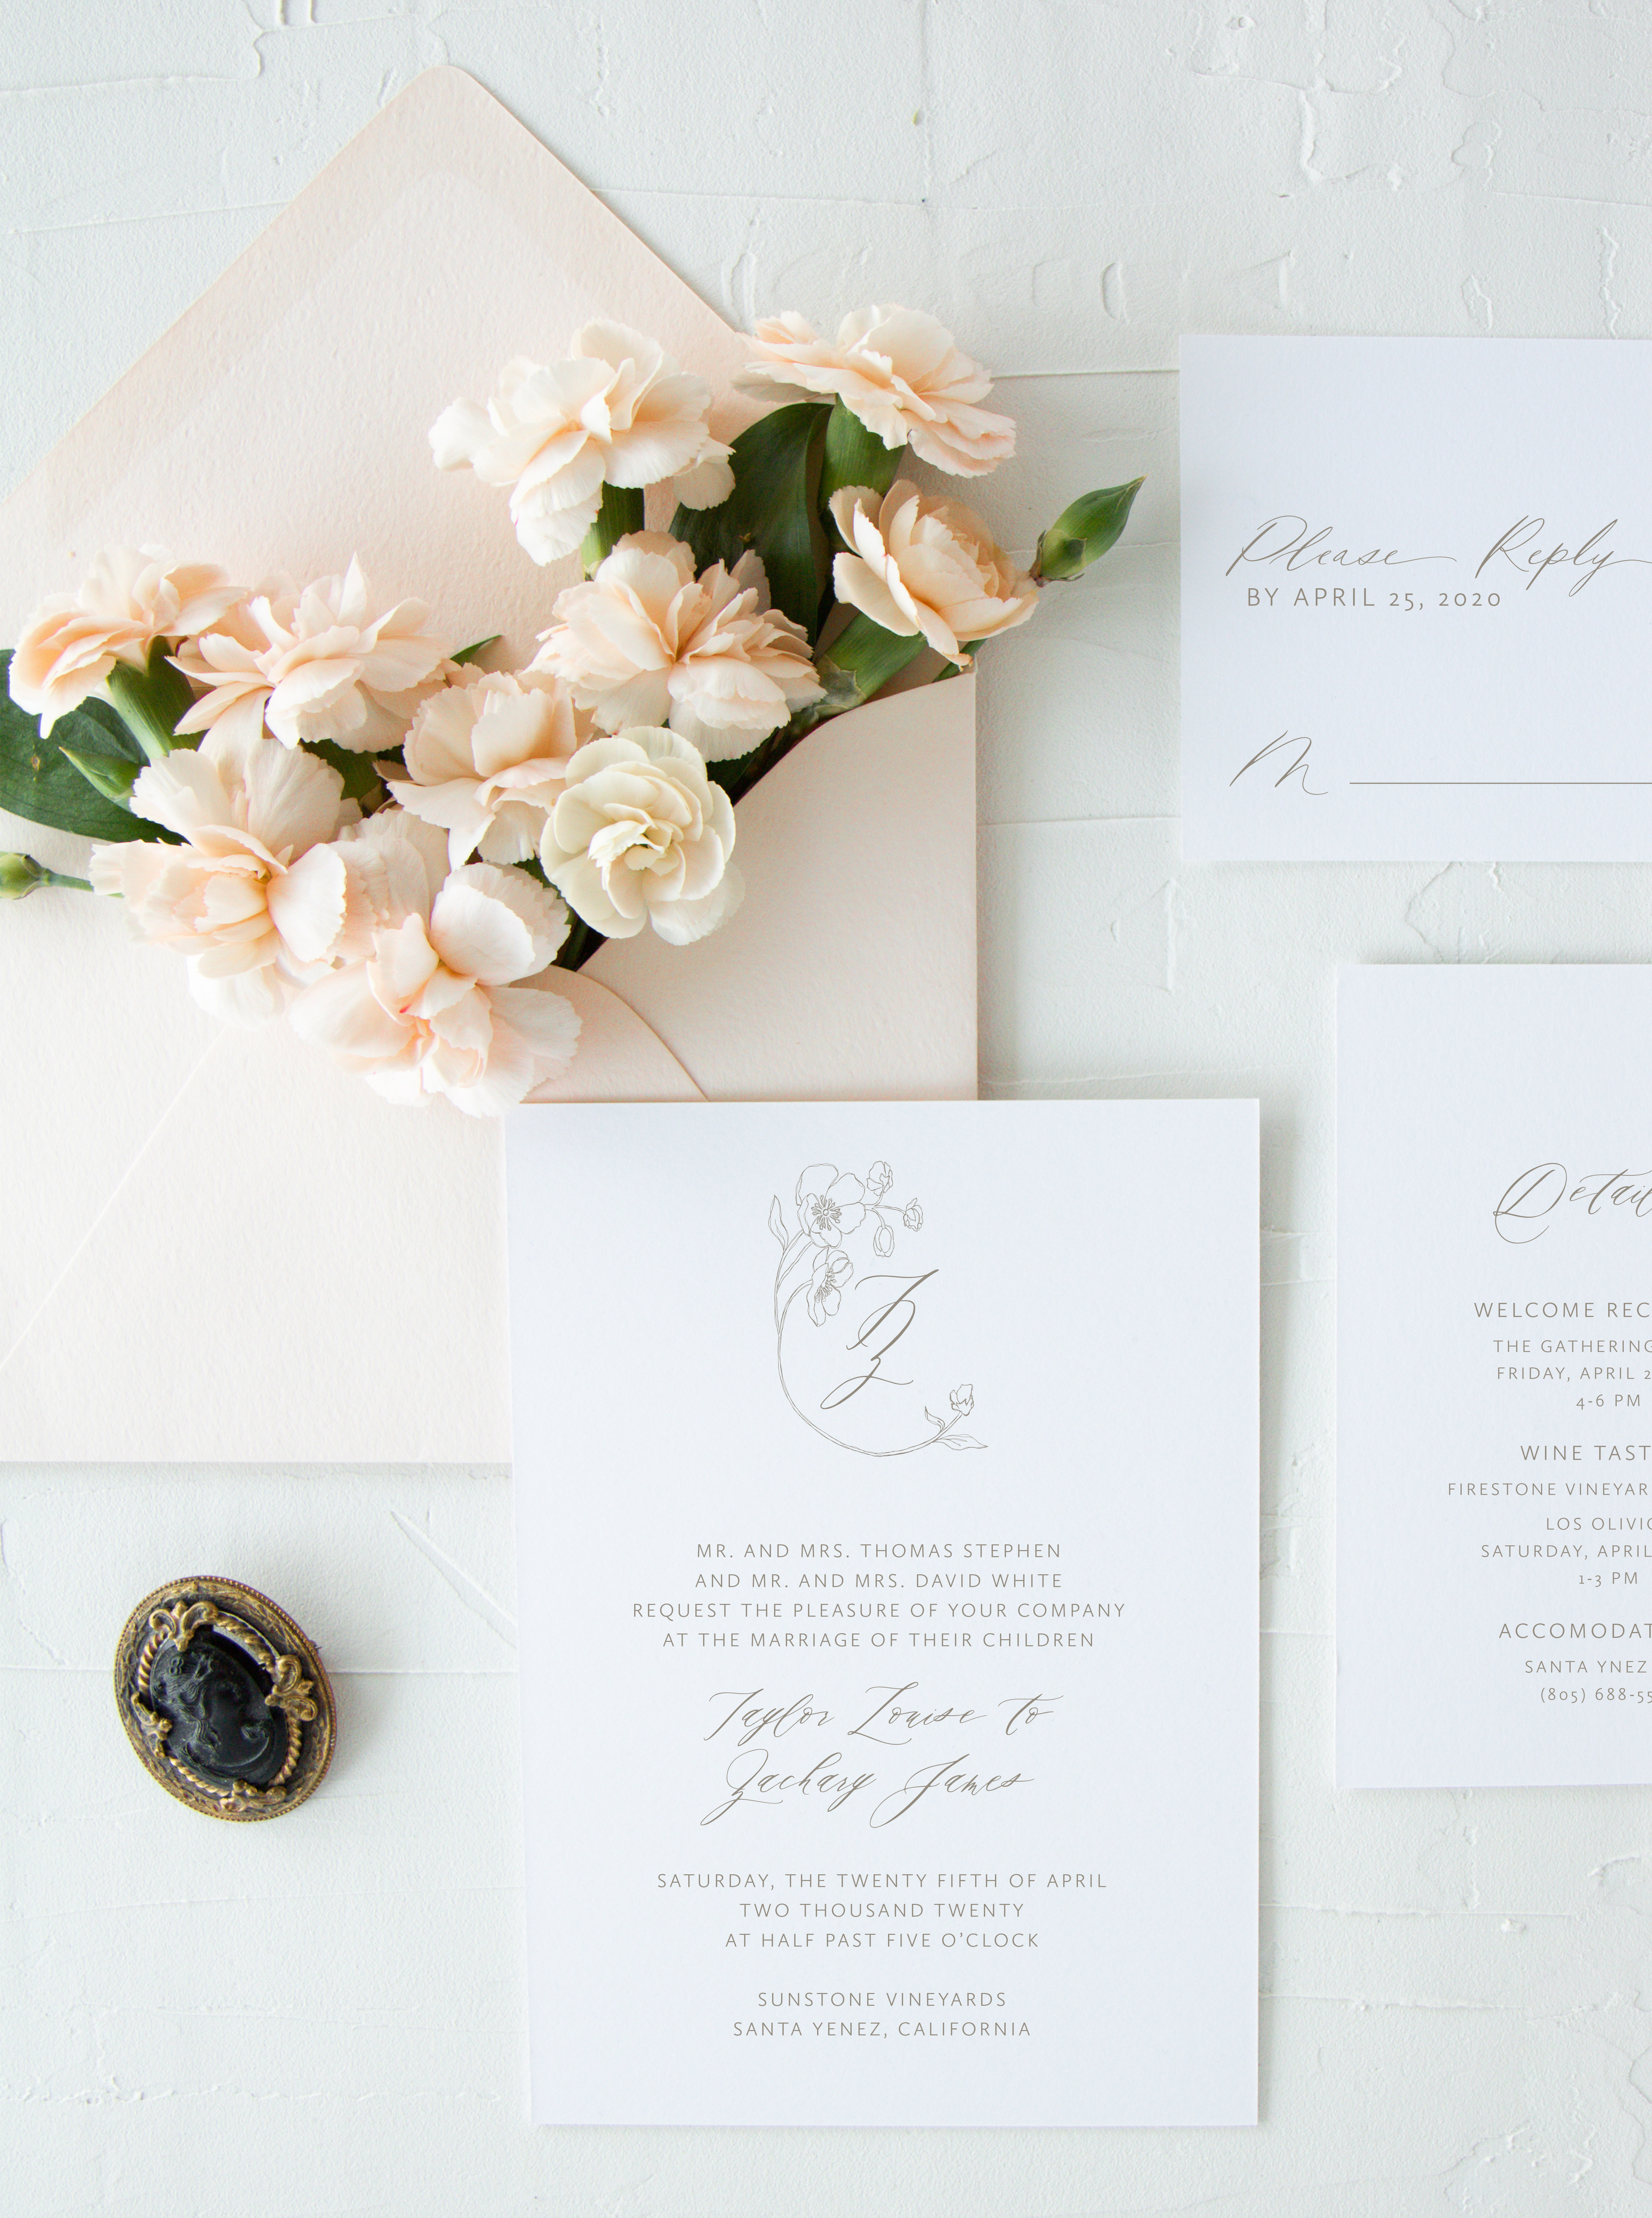 When To Order Wedding Invitations - lupineletters.com